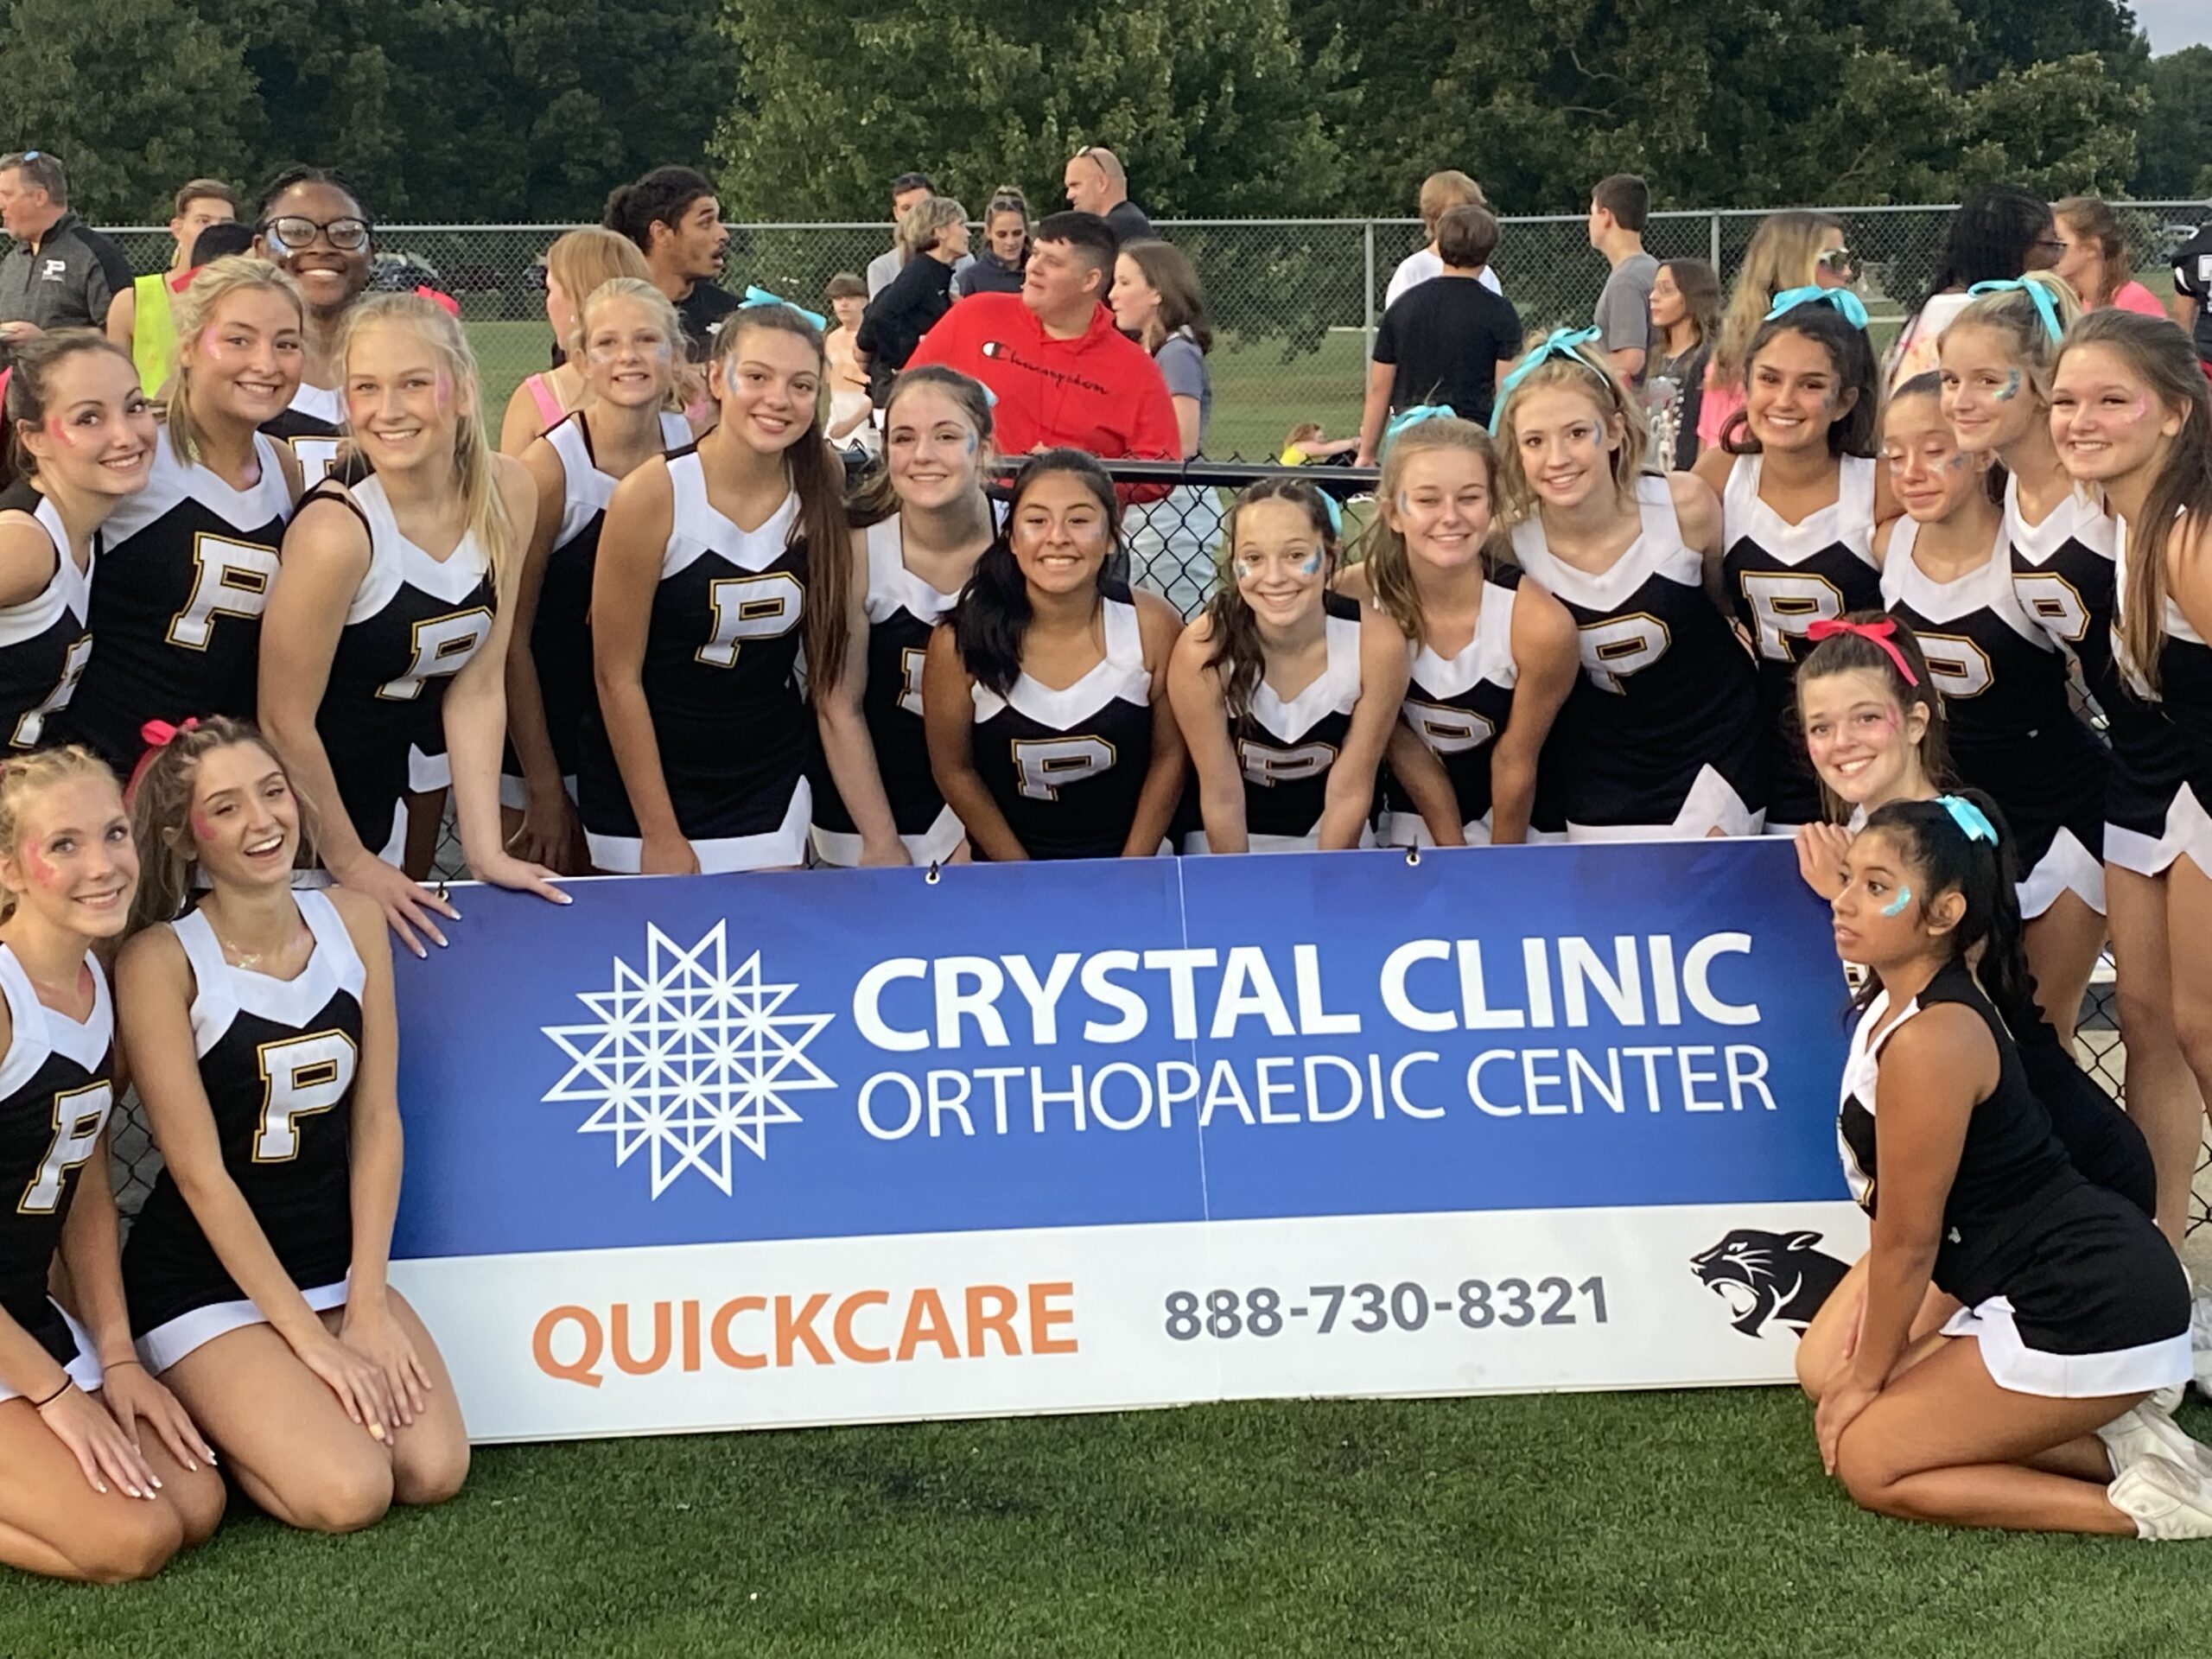 LUMIS Marketing helps Crystal Clinic Orthopaedic Center reach Ohio schools to support athletes